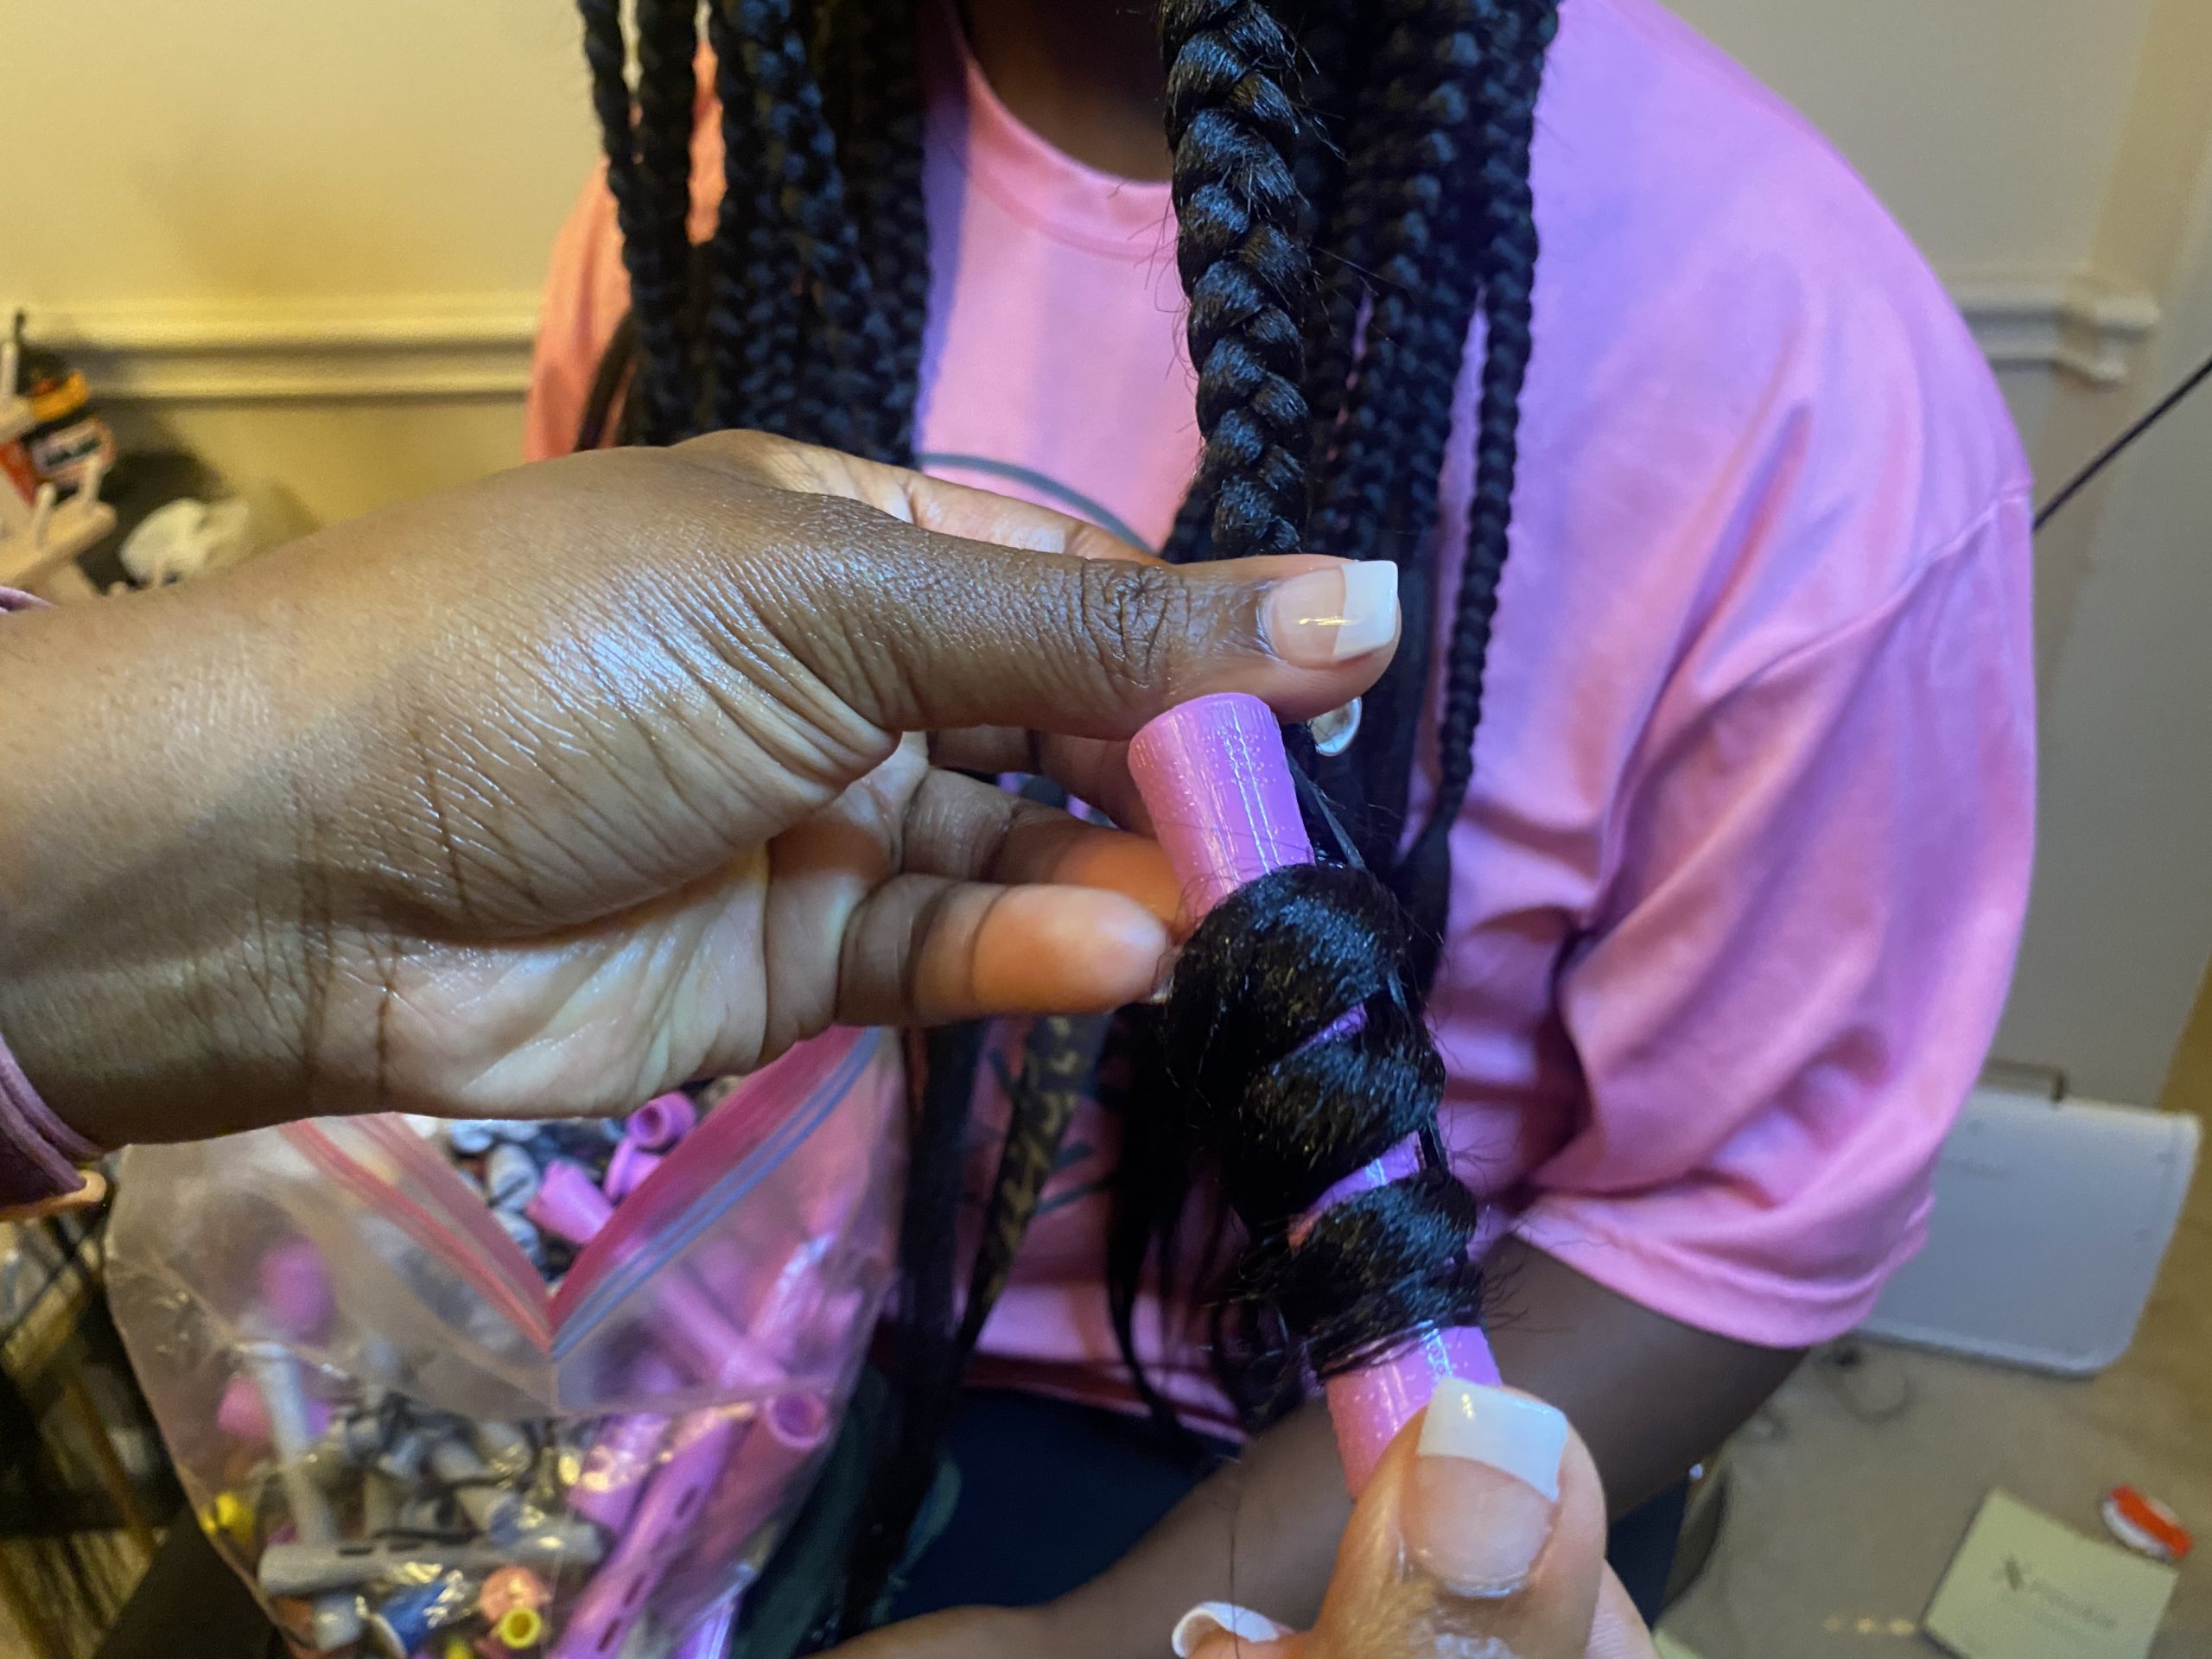 We Asked A Stylist To Break Down How To Achieve Knotless Braids Like Coi Leray’s